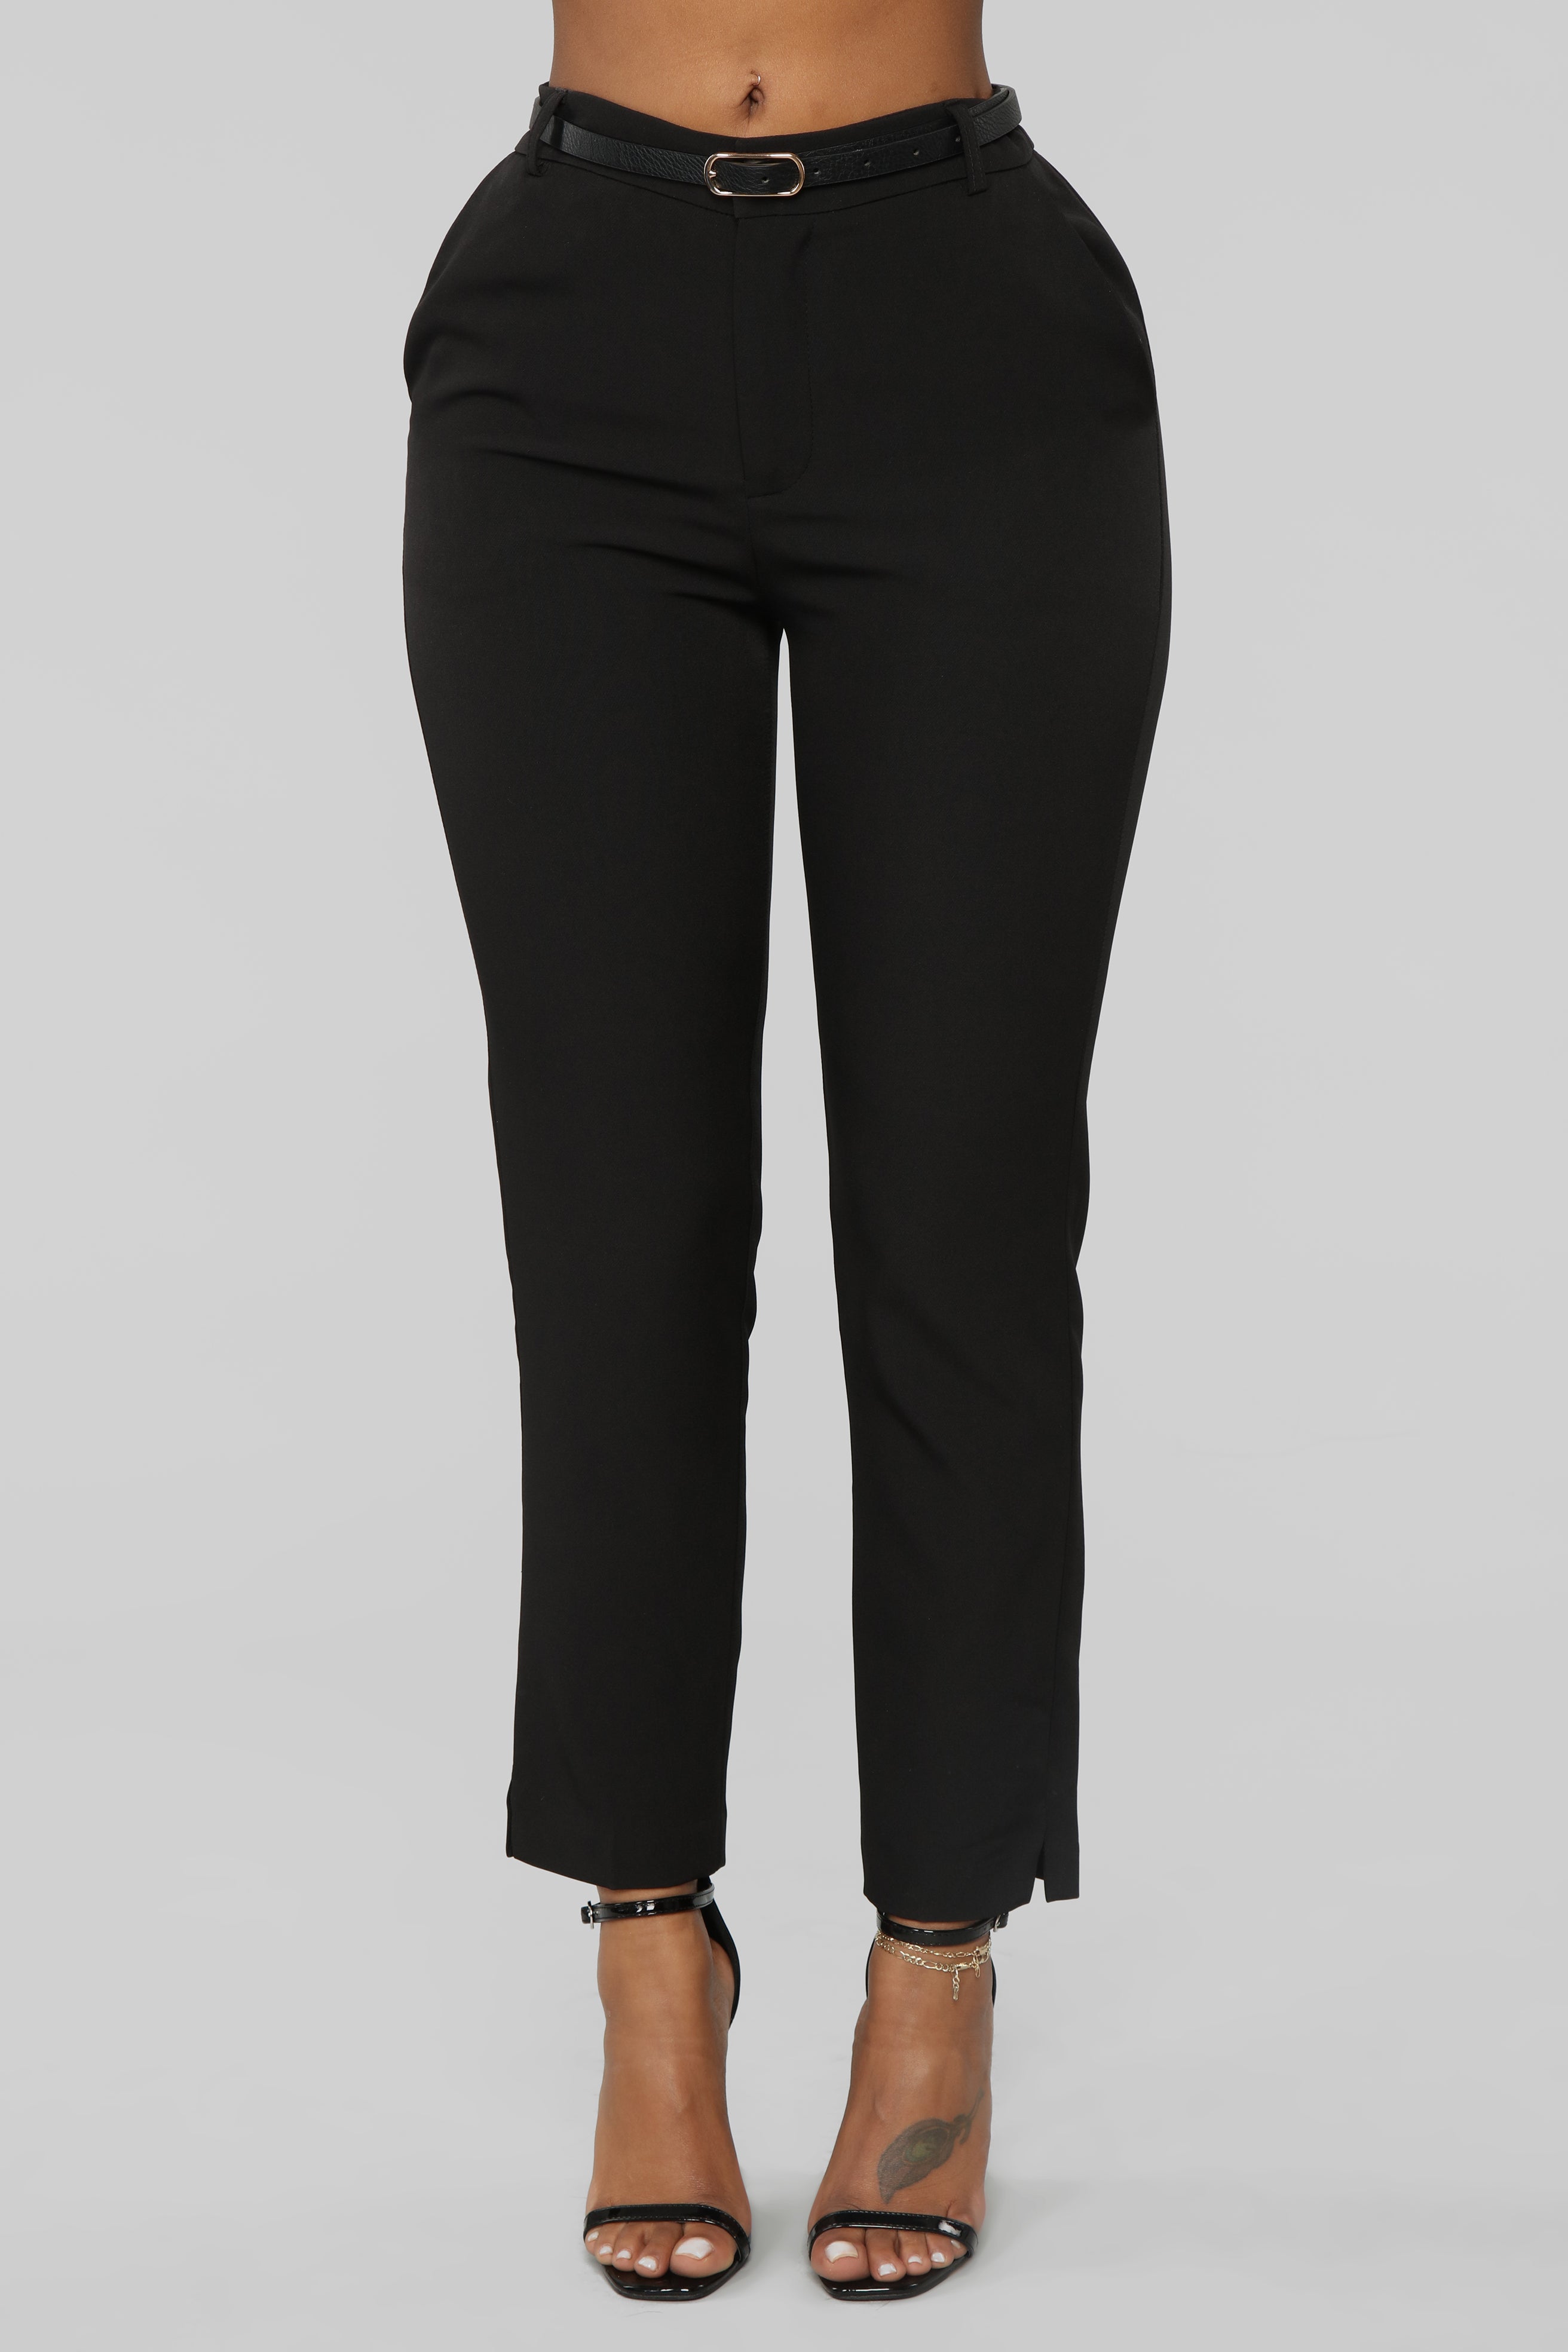 Here To Stay Belted Pants - Black